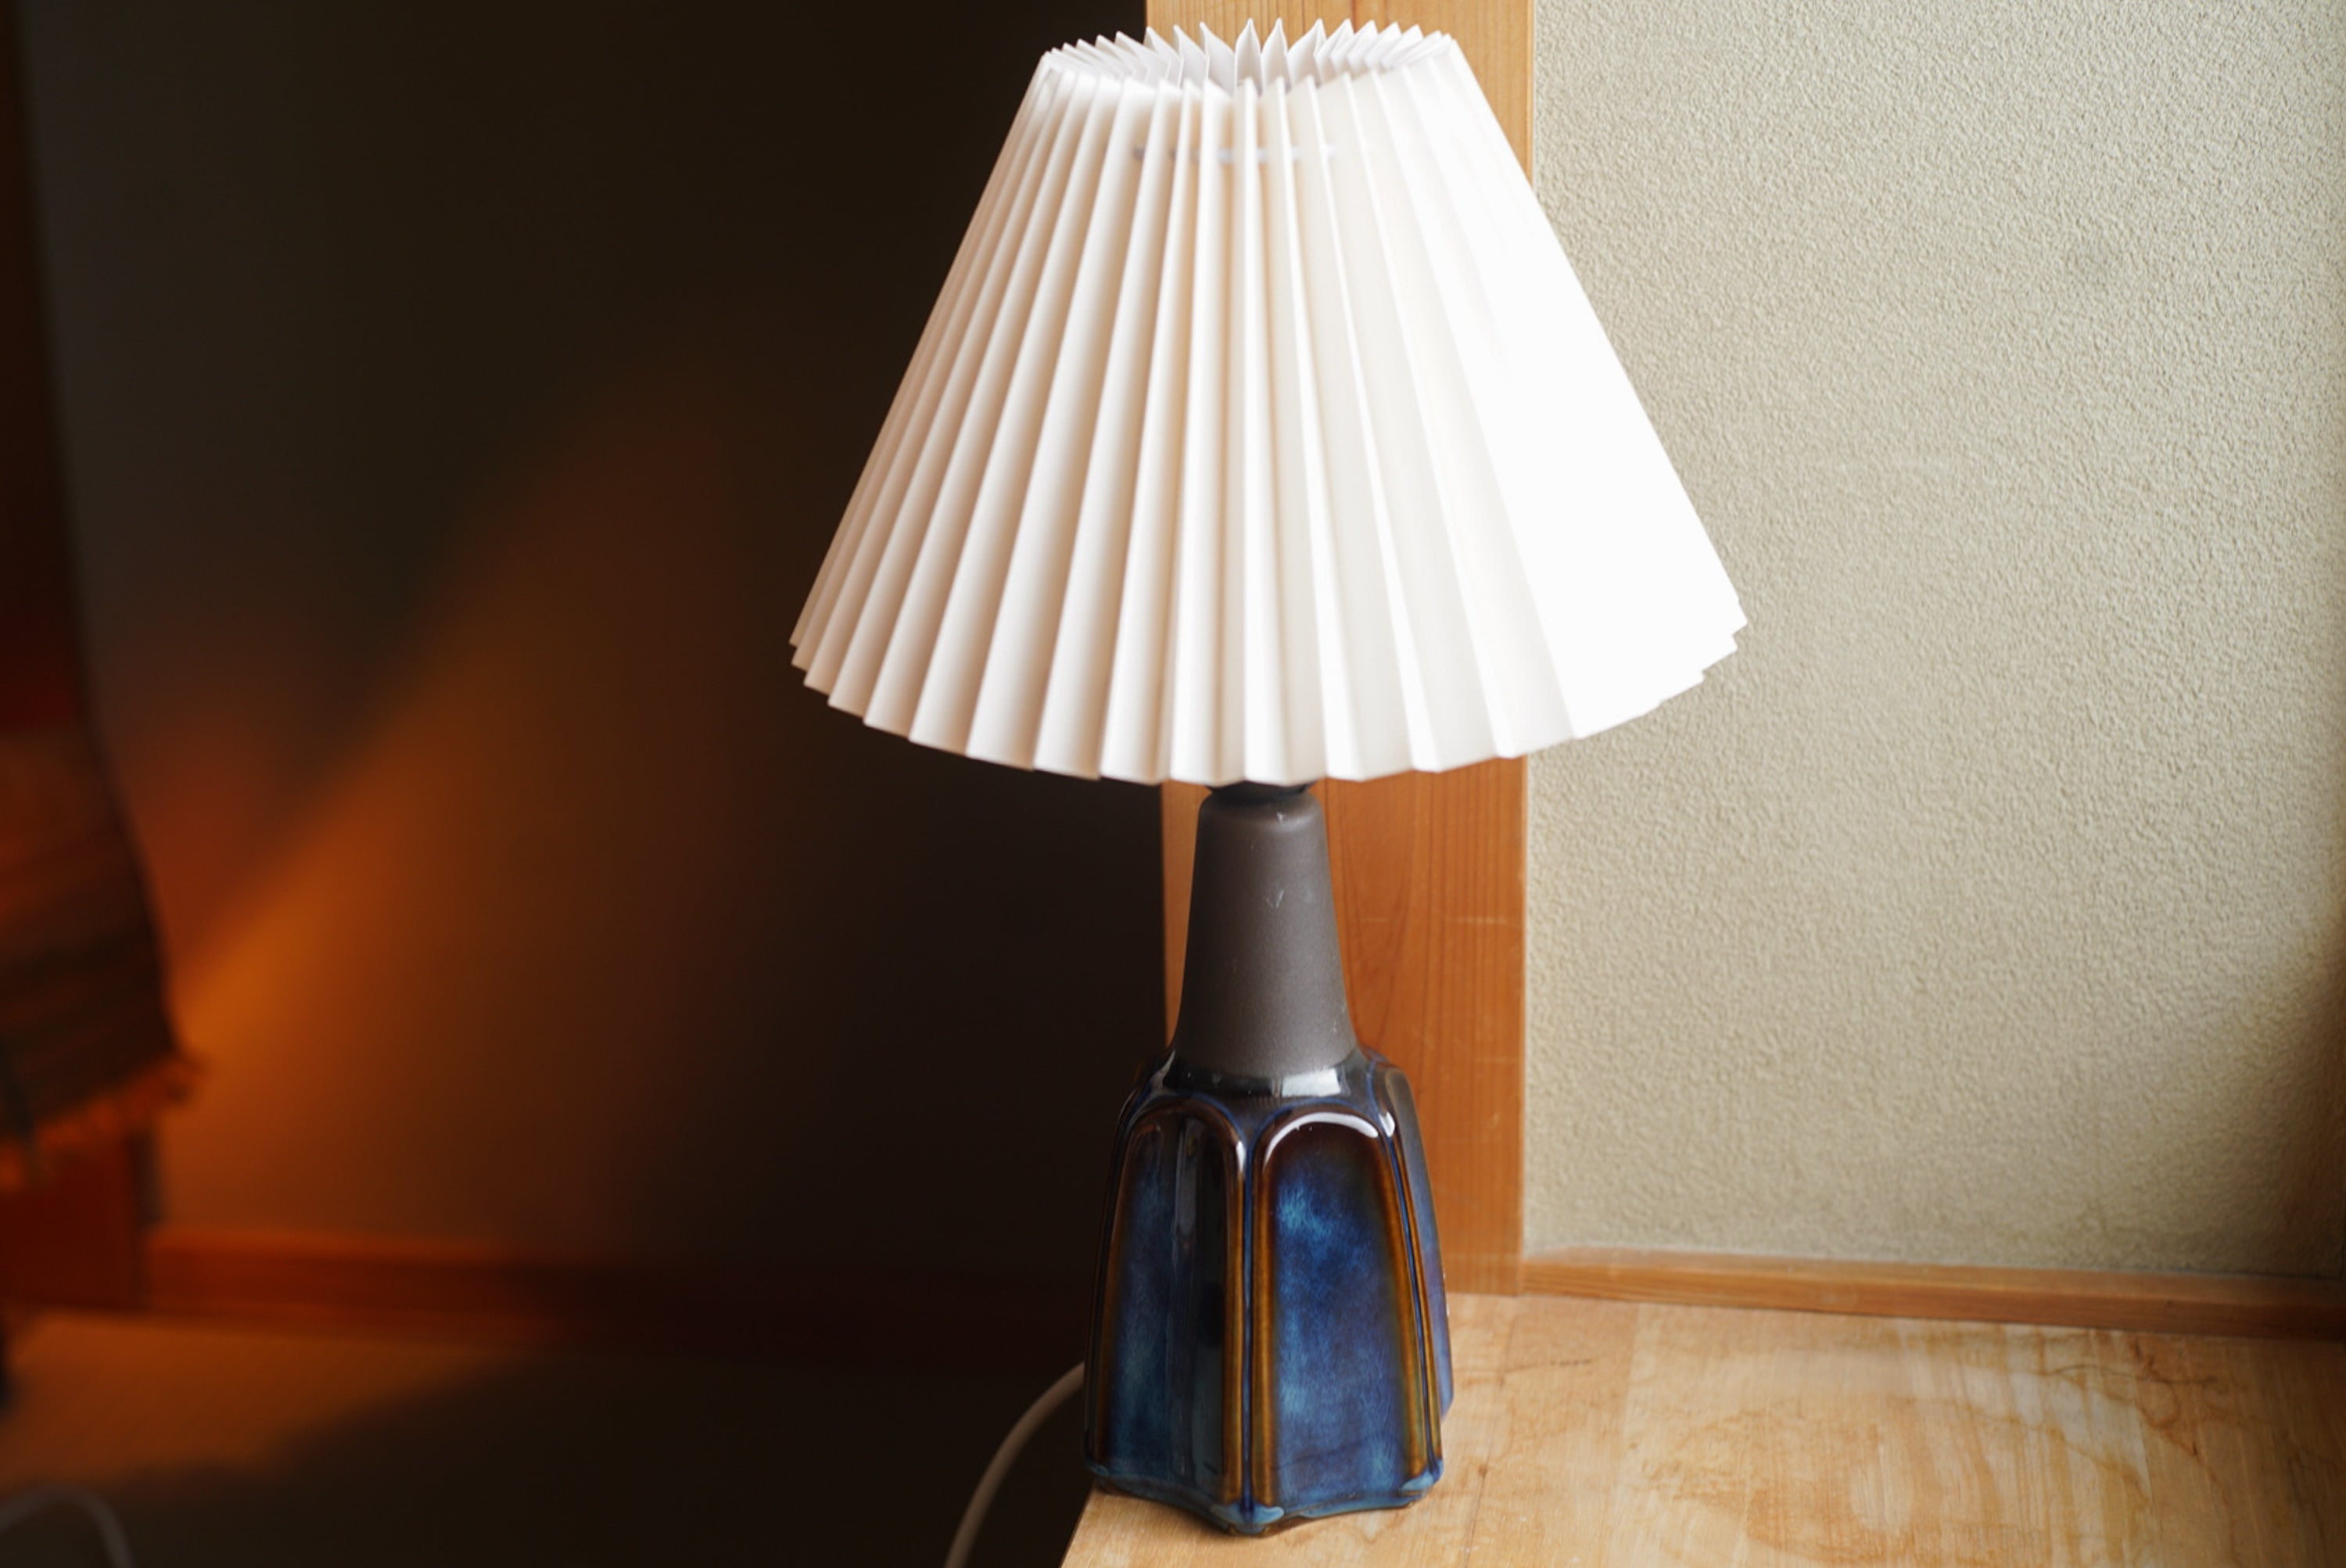 A stoneware table lamp handmade by Einar Jphansen for Danish Søholm located on the island of Bornholm in Denmark in the 1960s.

Stamped and signed on the base.

Sold without lampshade. Height includes socket. fully functional and in beautiful